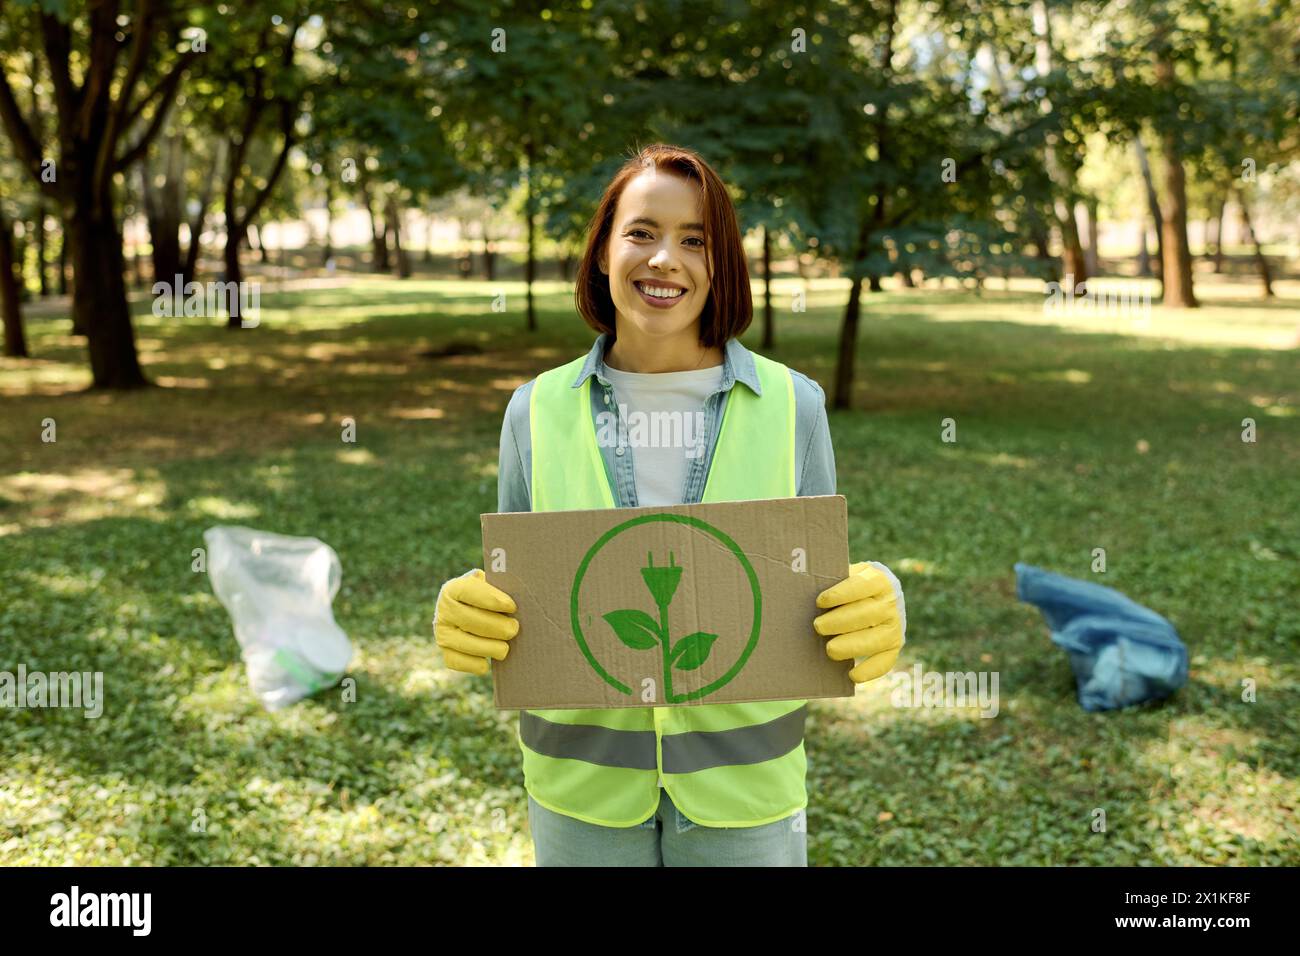 A woman in a green vest holds a cardboard sign, her expression reflective of a plea for help or awareness. Stock Photo